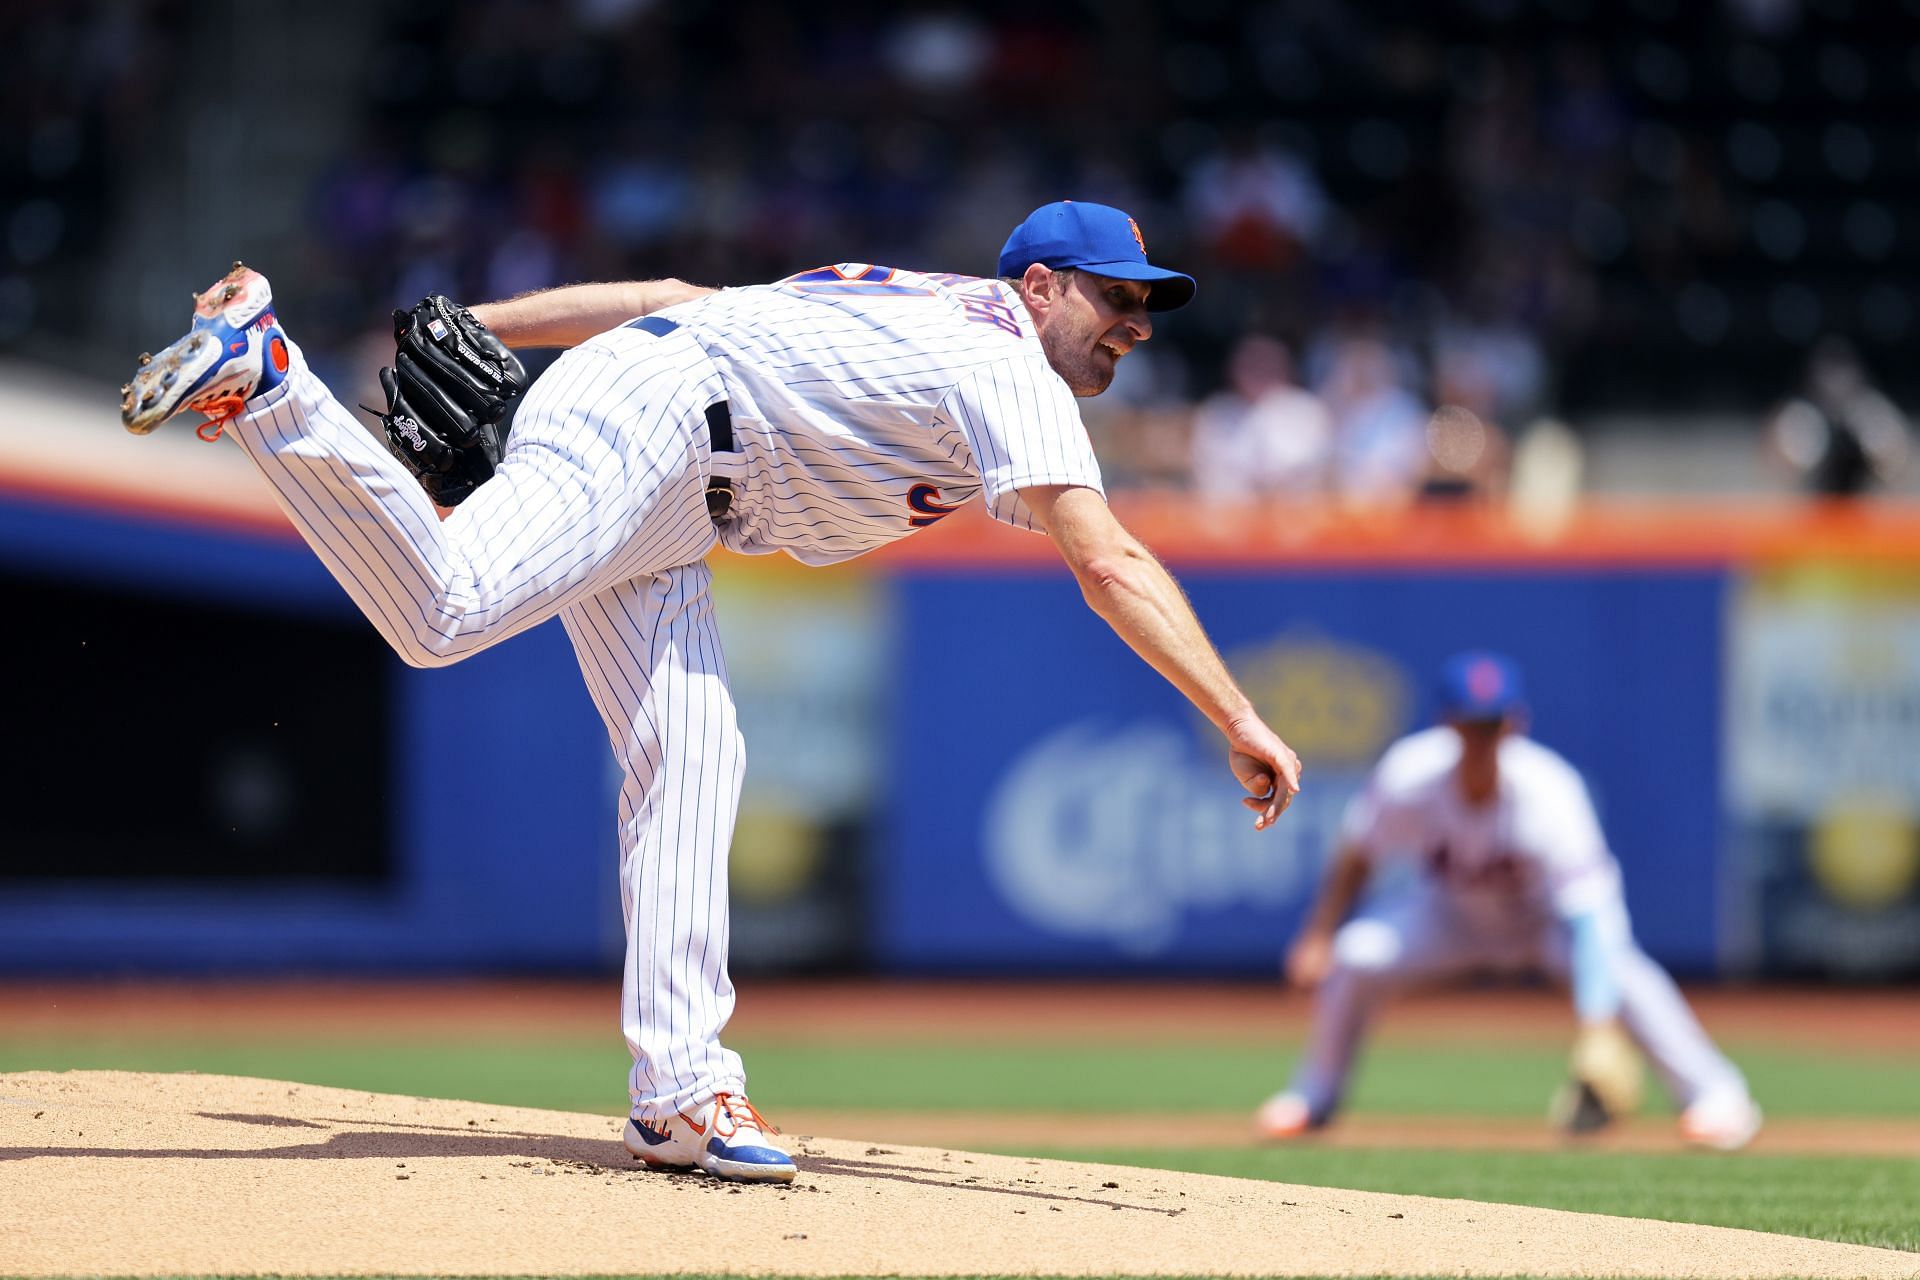 Max Scherzer of the New York Mets pitches in the first inning against the Philadelphia Phillies at Citi Field.